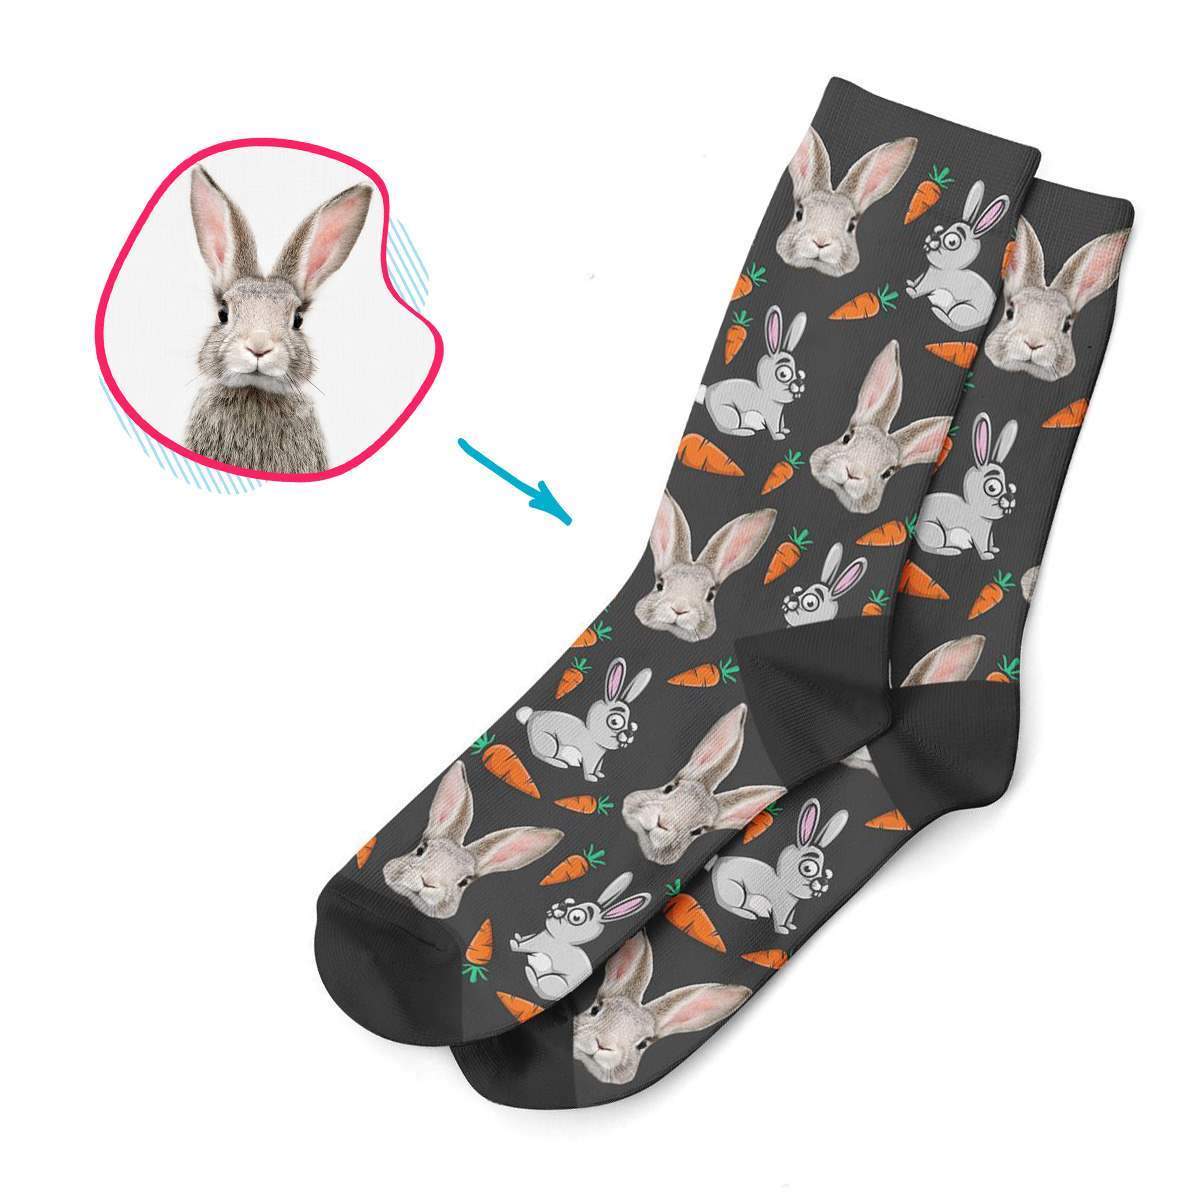 dark Bunny socks personalized with photo of face printed on them